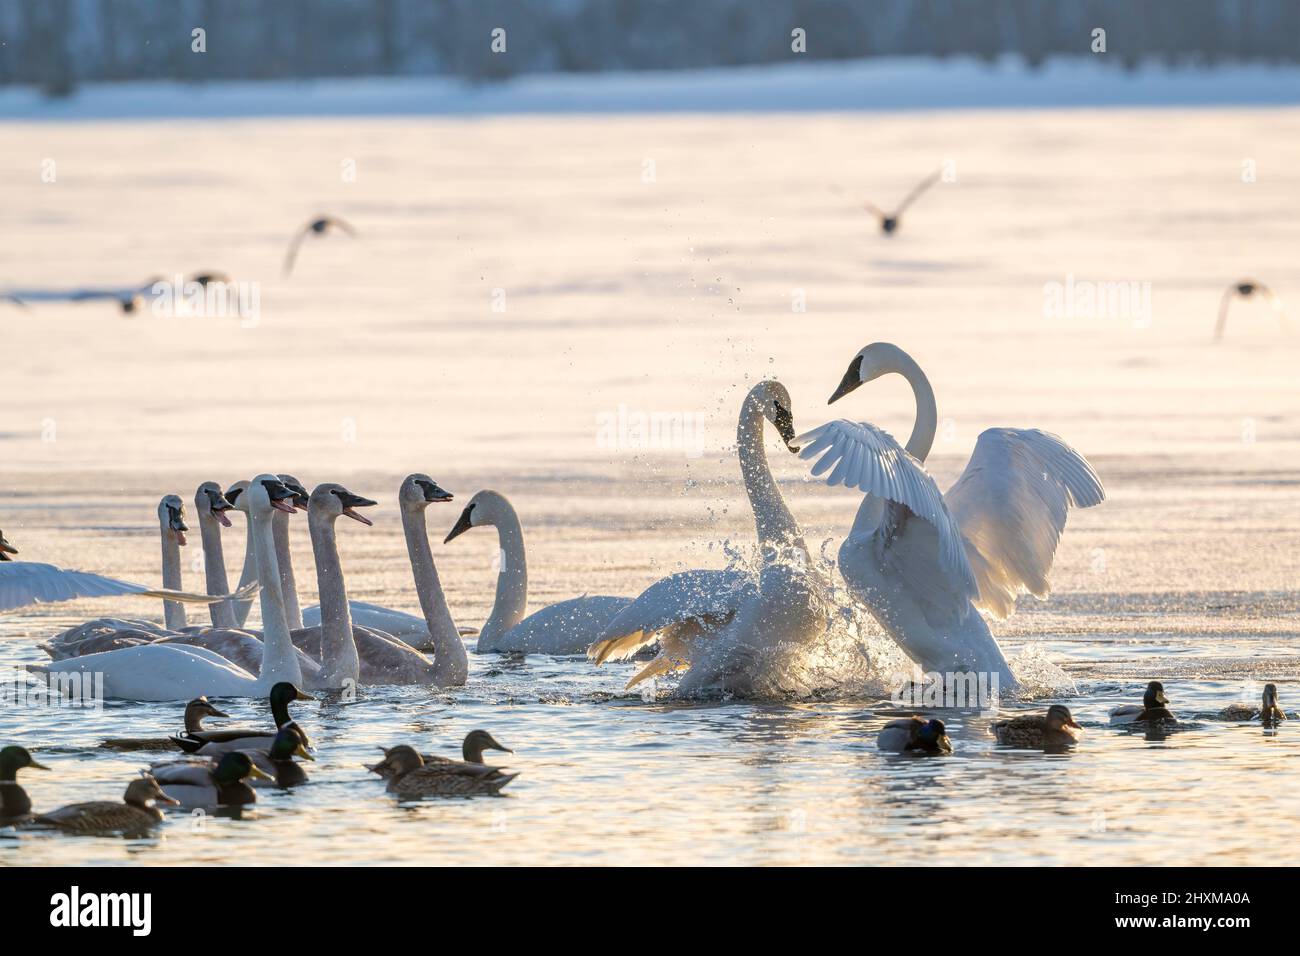 Trumpeter swan bonded pair interacting (Cygnus buccinator), St. Croix river, WI, USA, by Dominique Braud/Dembinsky Photo Assoc Stock Photo